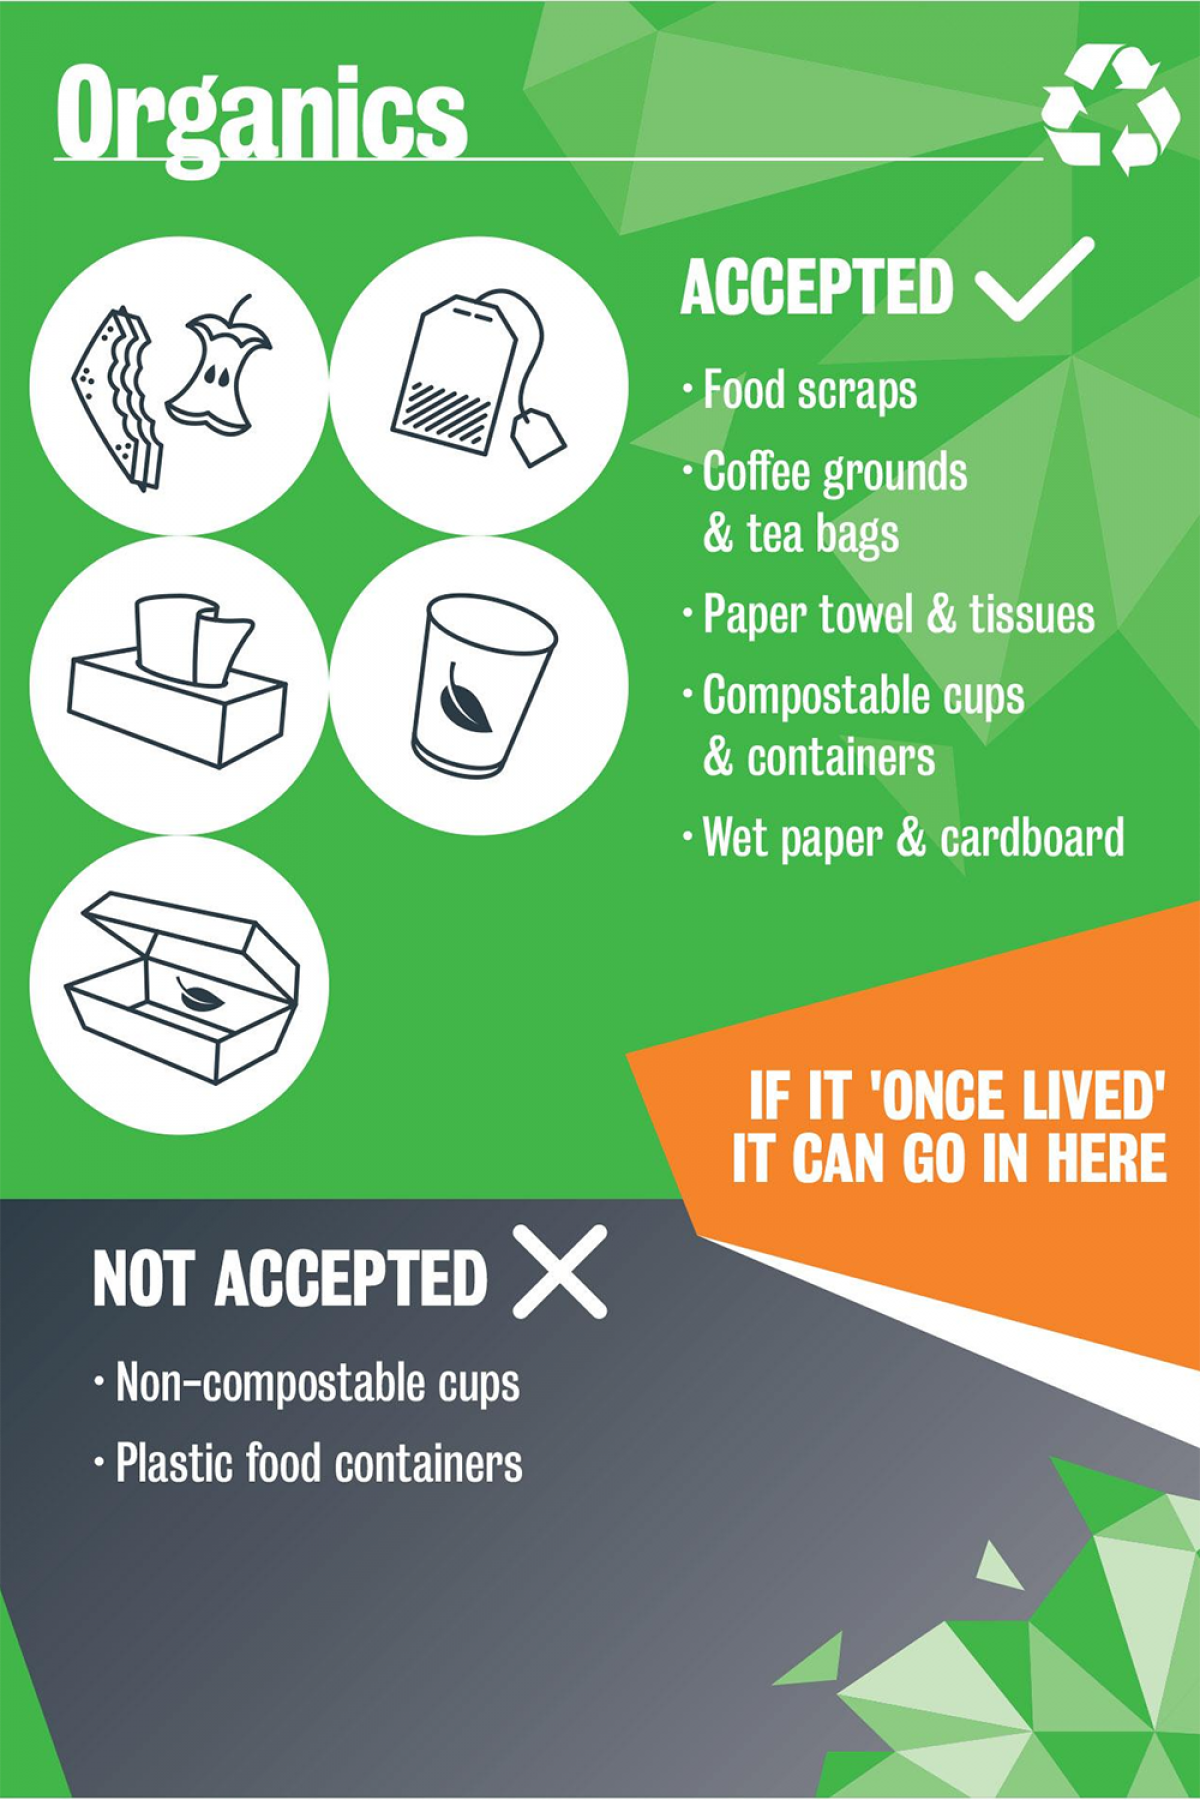 Accepted in green bin - food scraps, coffee grounds & tea bags, paper towel & tissue, compostable cups & containers, wet paper & cardboard; not accepted - non-compostable cups and plastic containers 